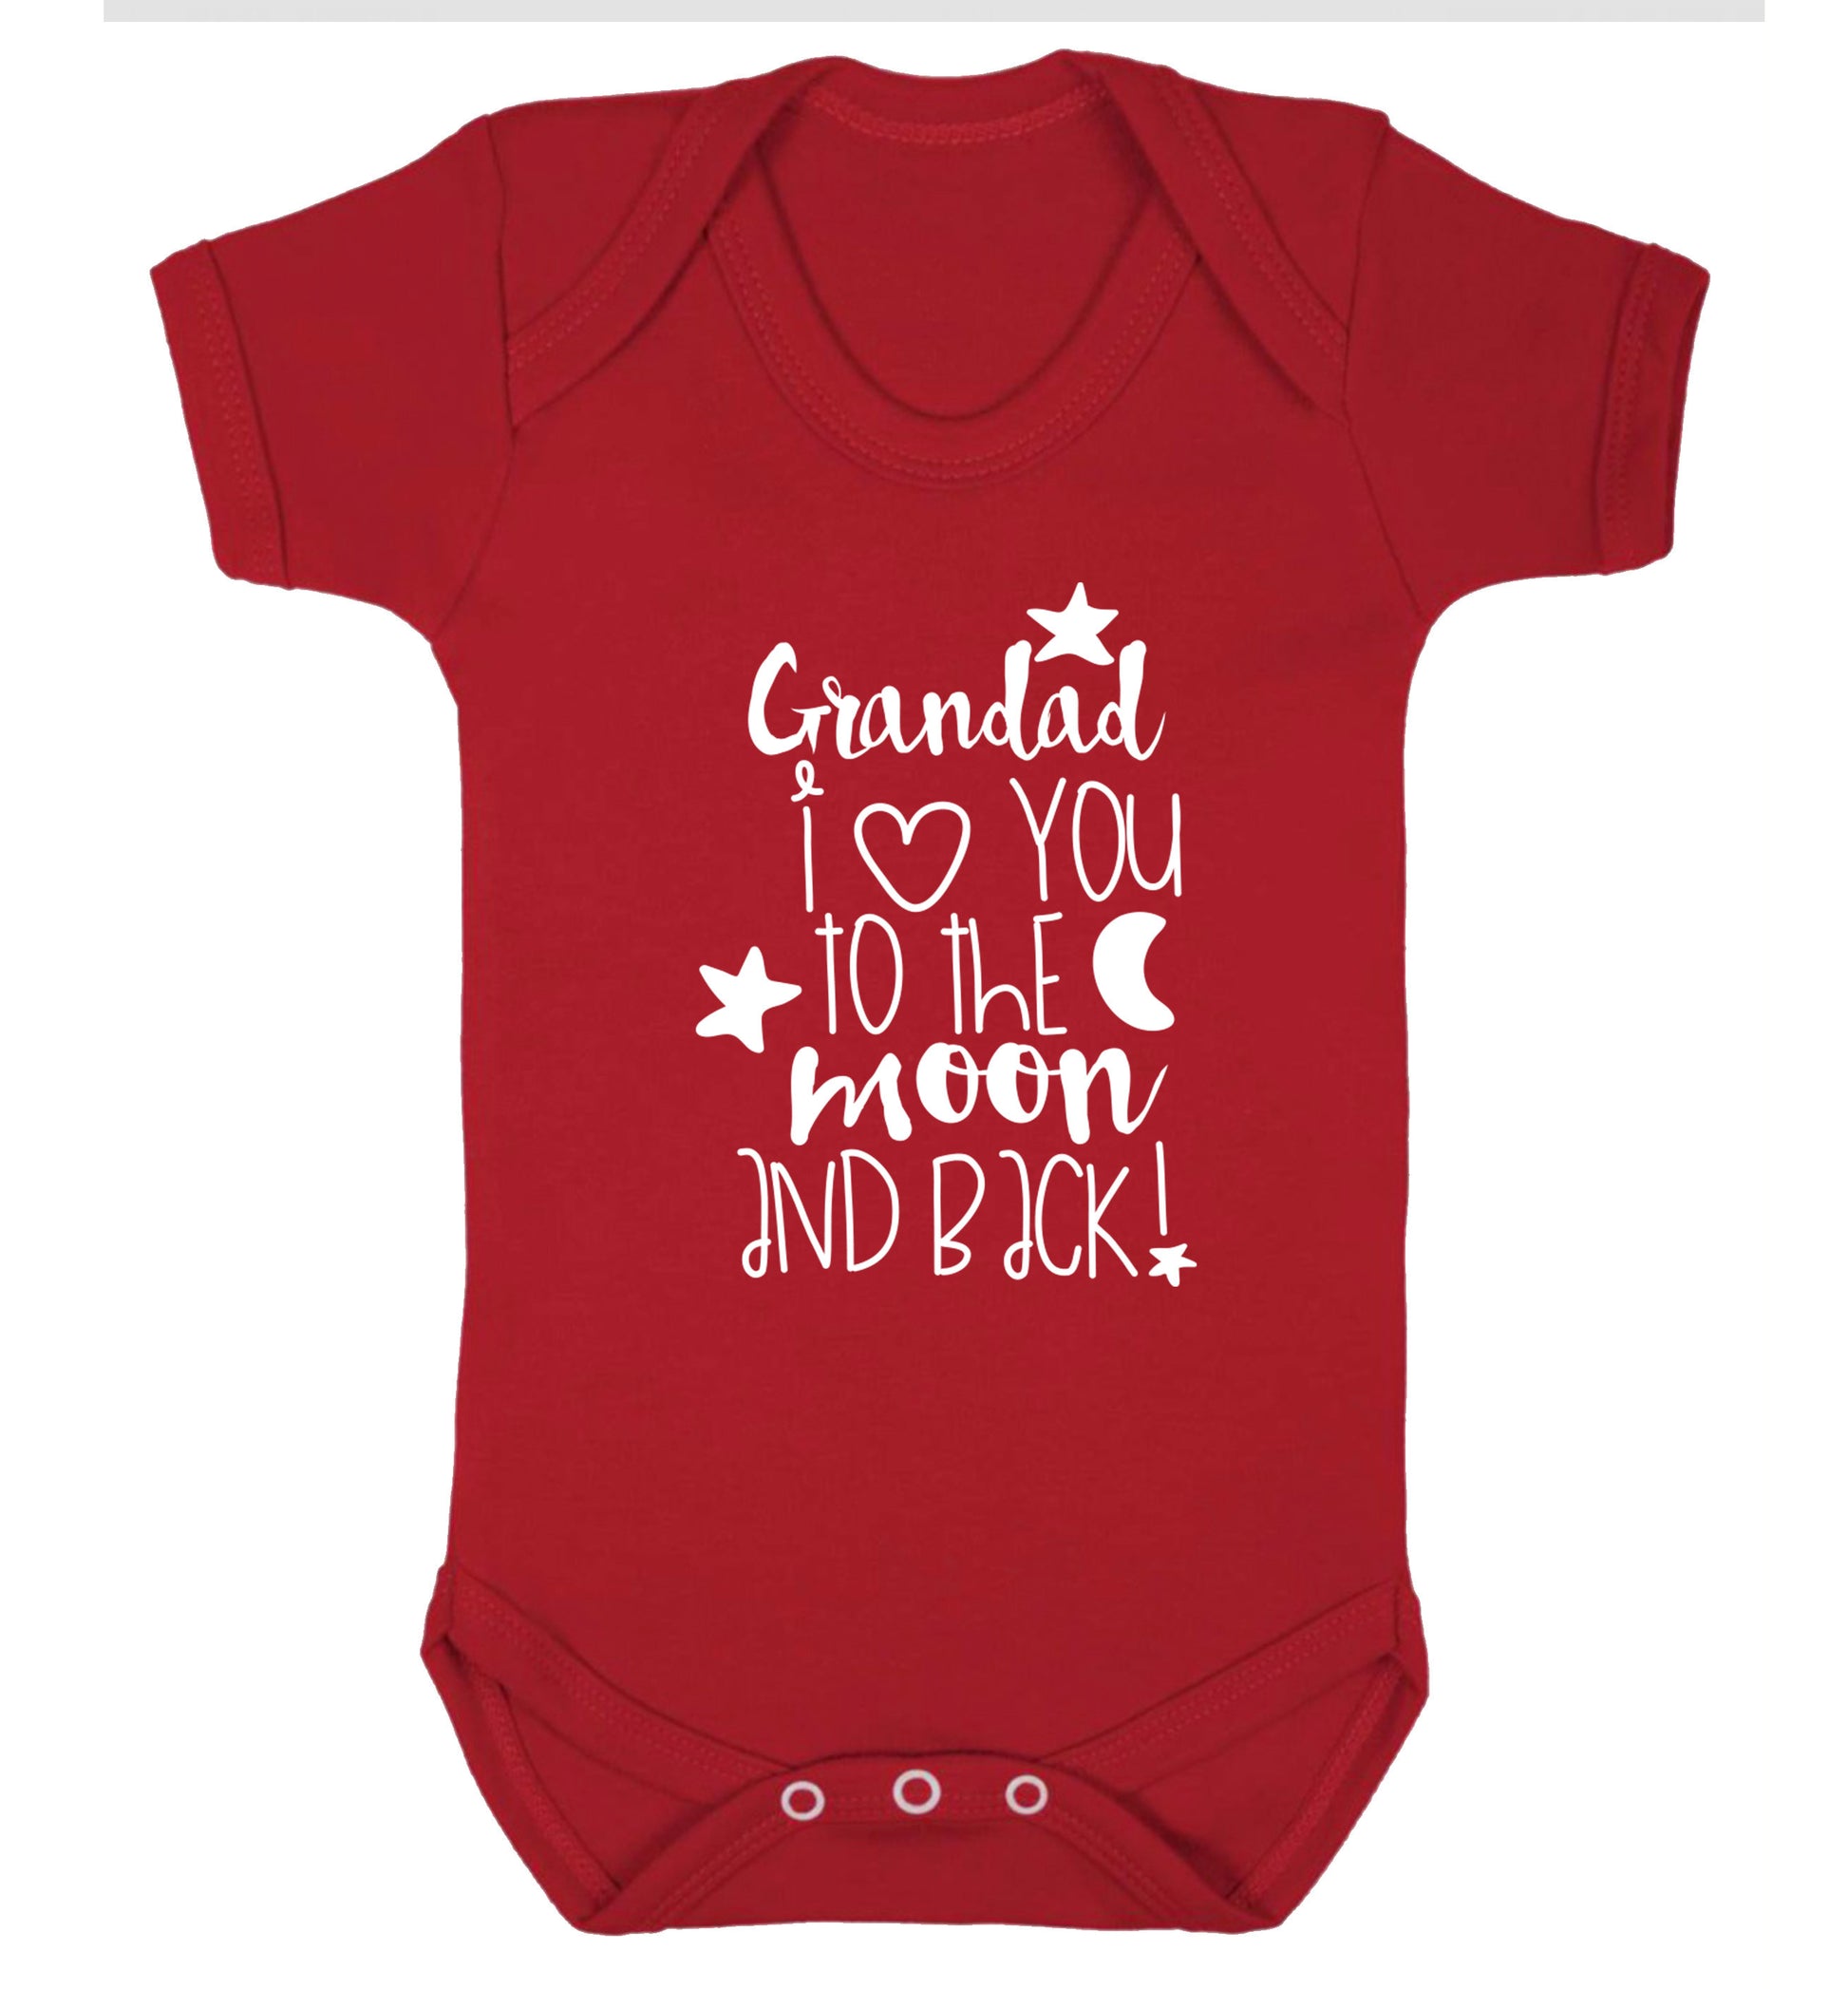 Grandad's I love you to the moon and back Baby Vest red 18-24 months